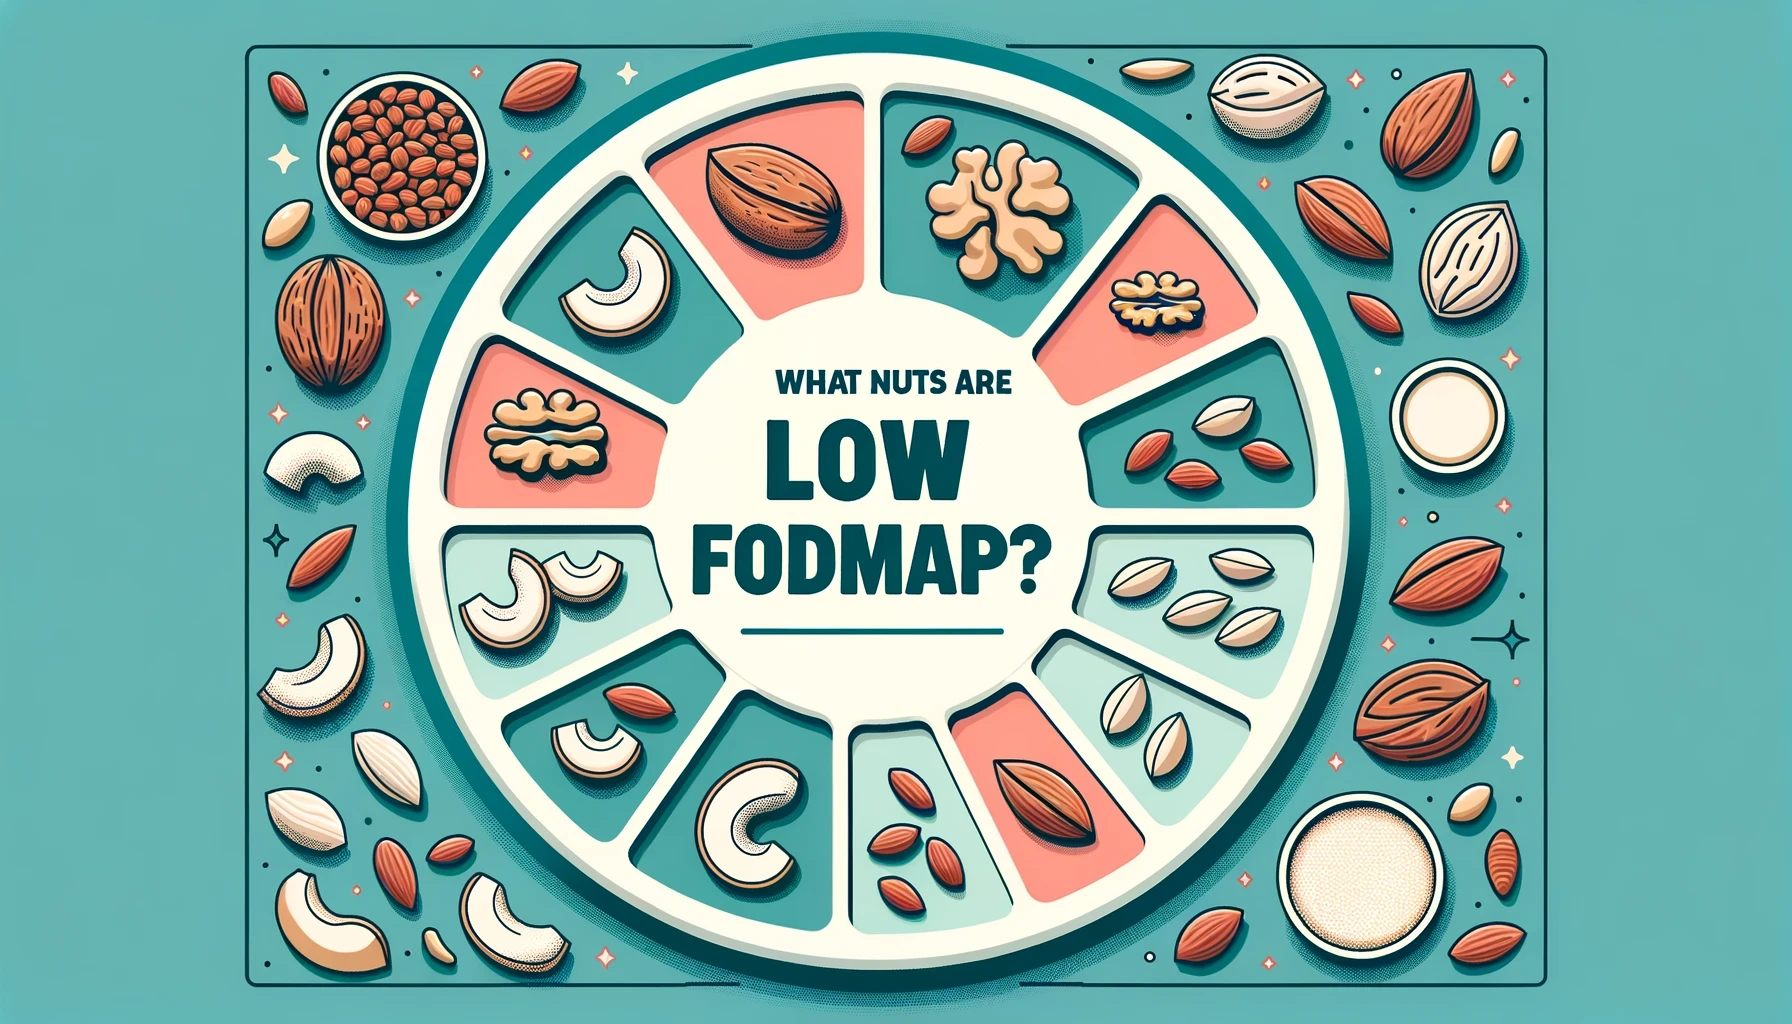 Featured image for a blog about what fruits are low FODMAP featuring a segmented plate, each segment containing a different type of nut